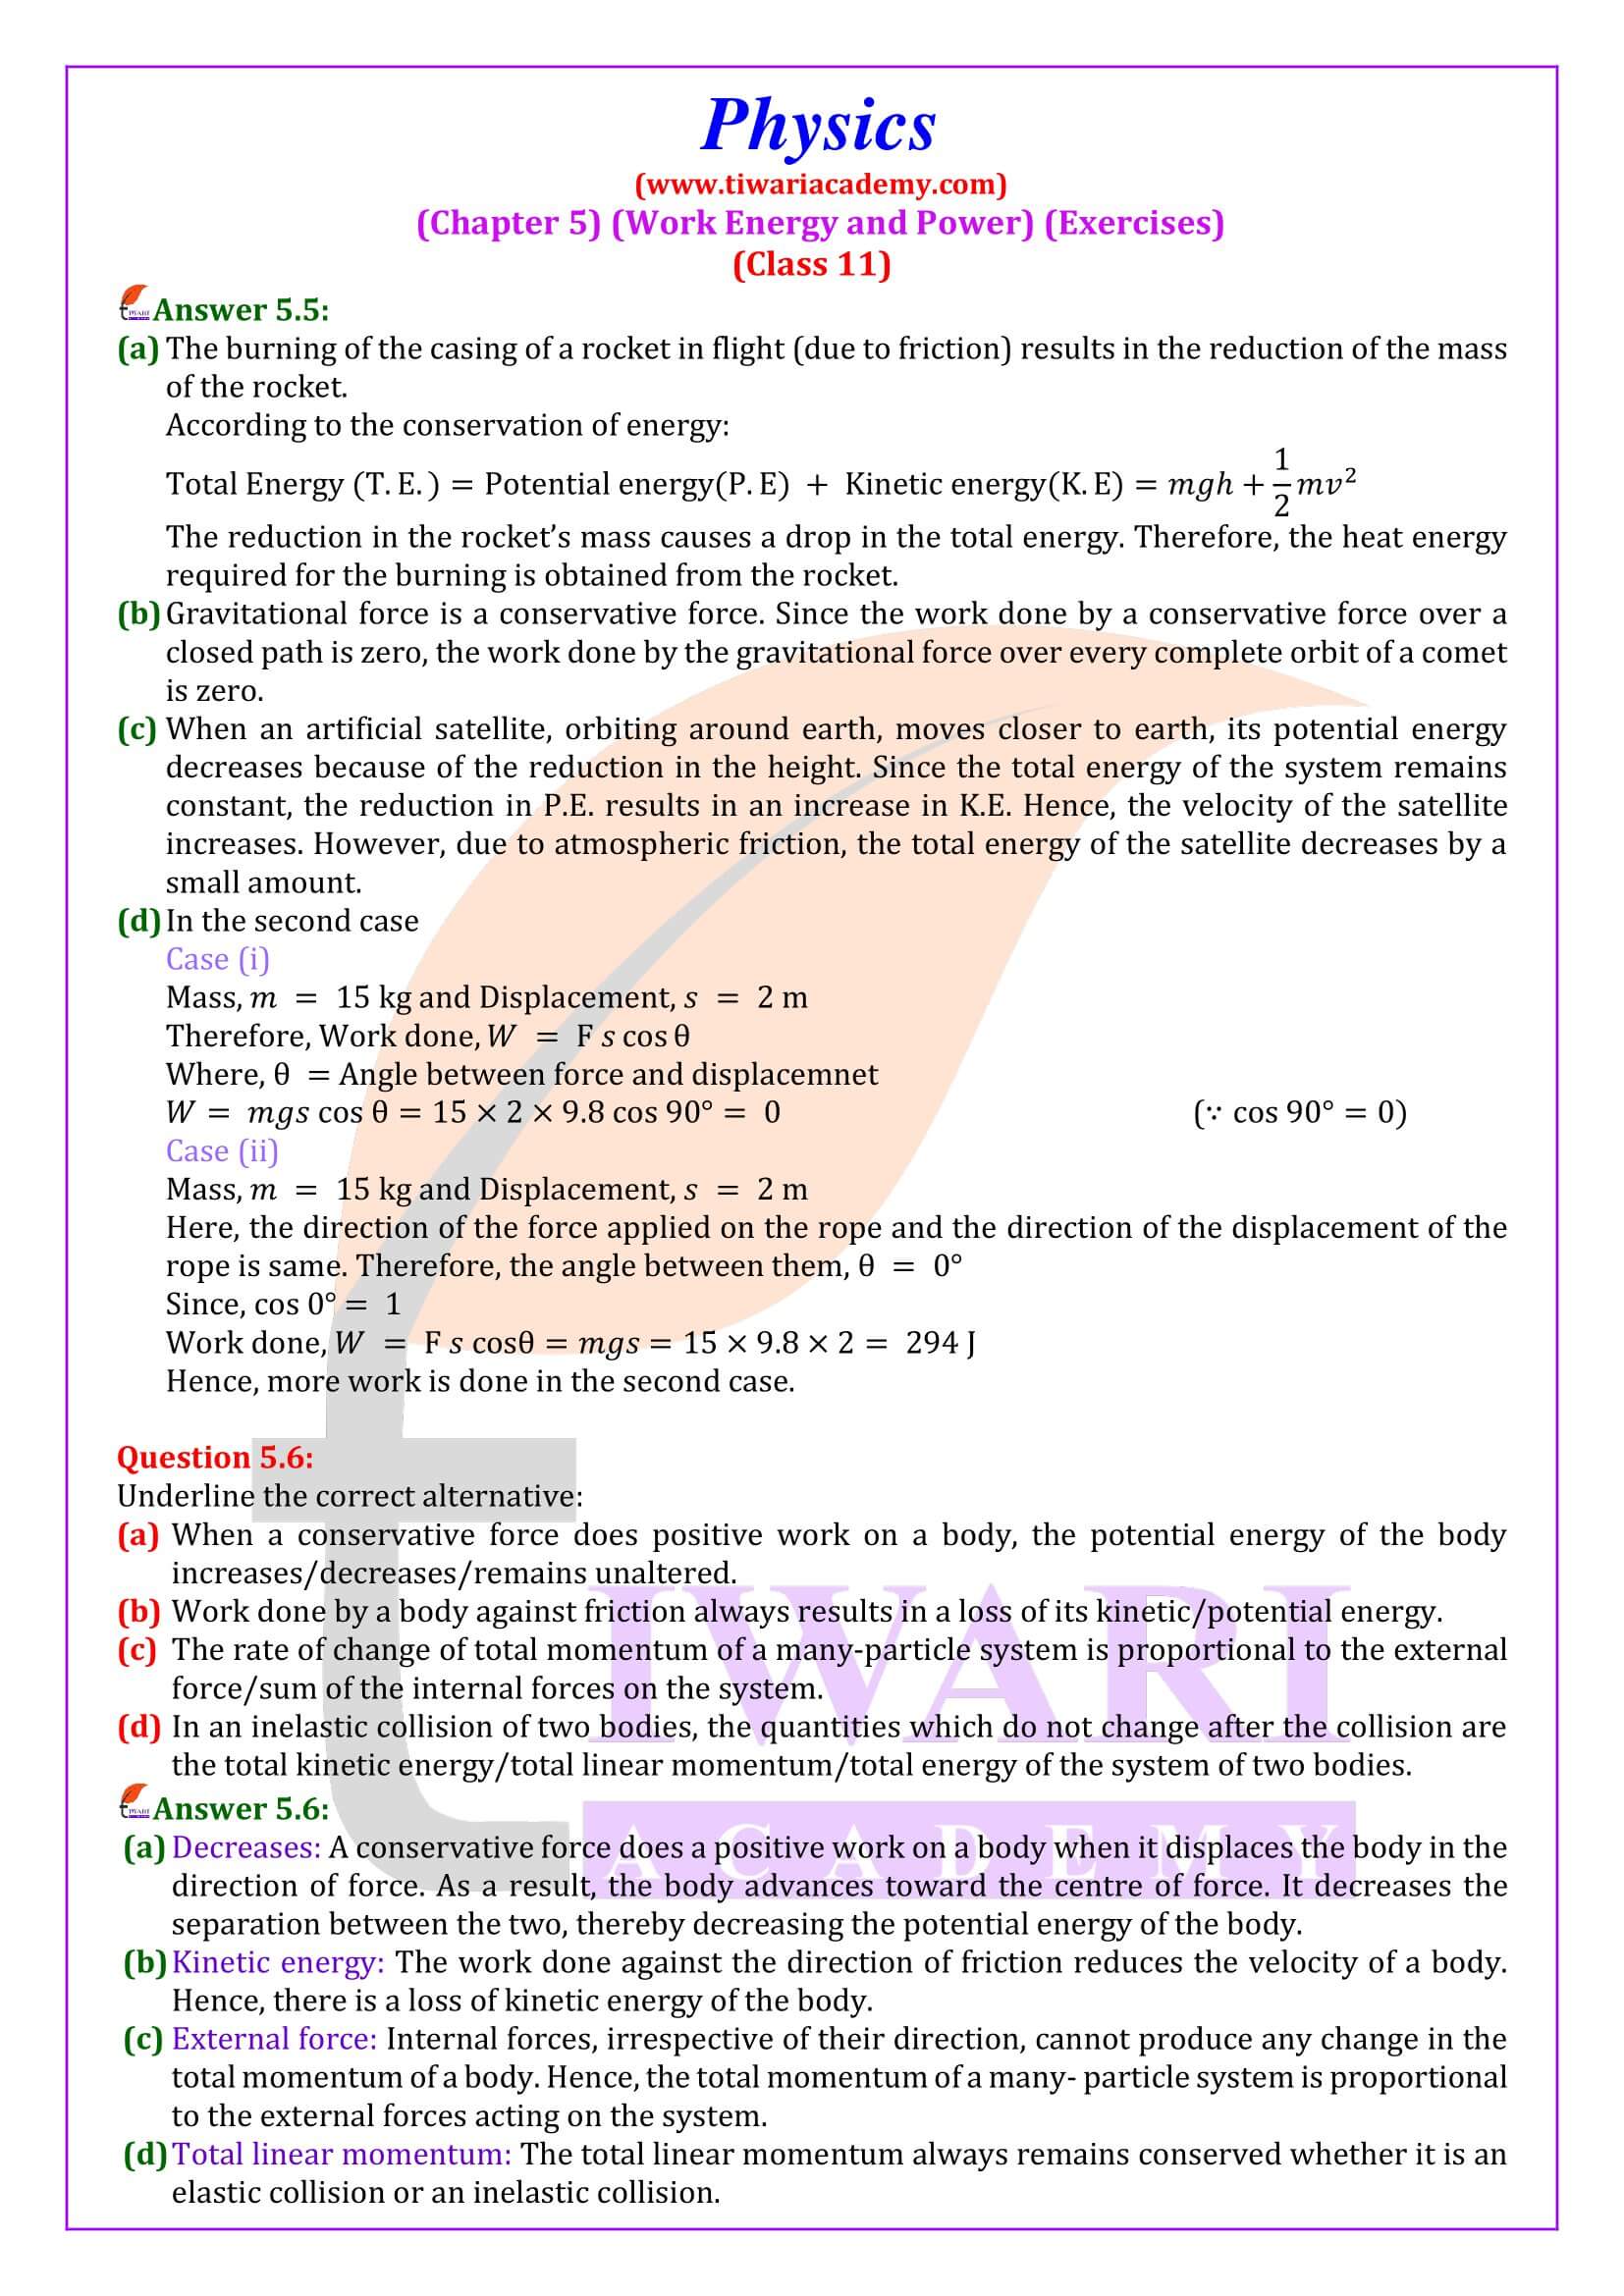 NCERT Solutions for Class 11 Physics Chapter 5 in English Medium